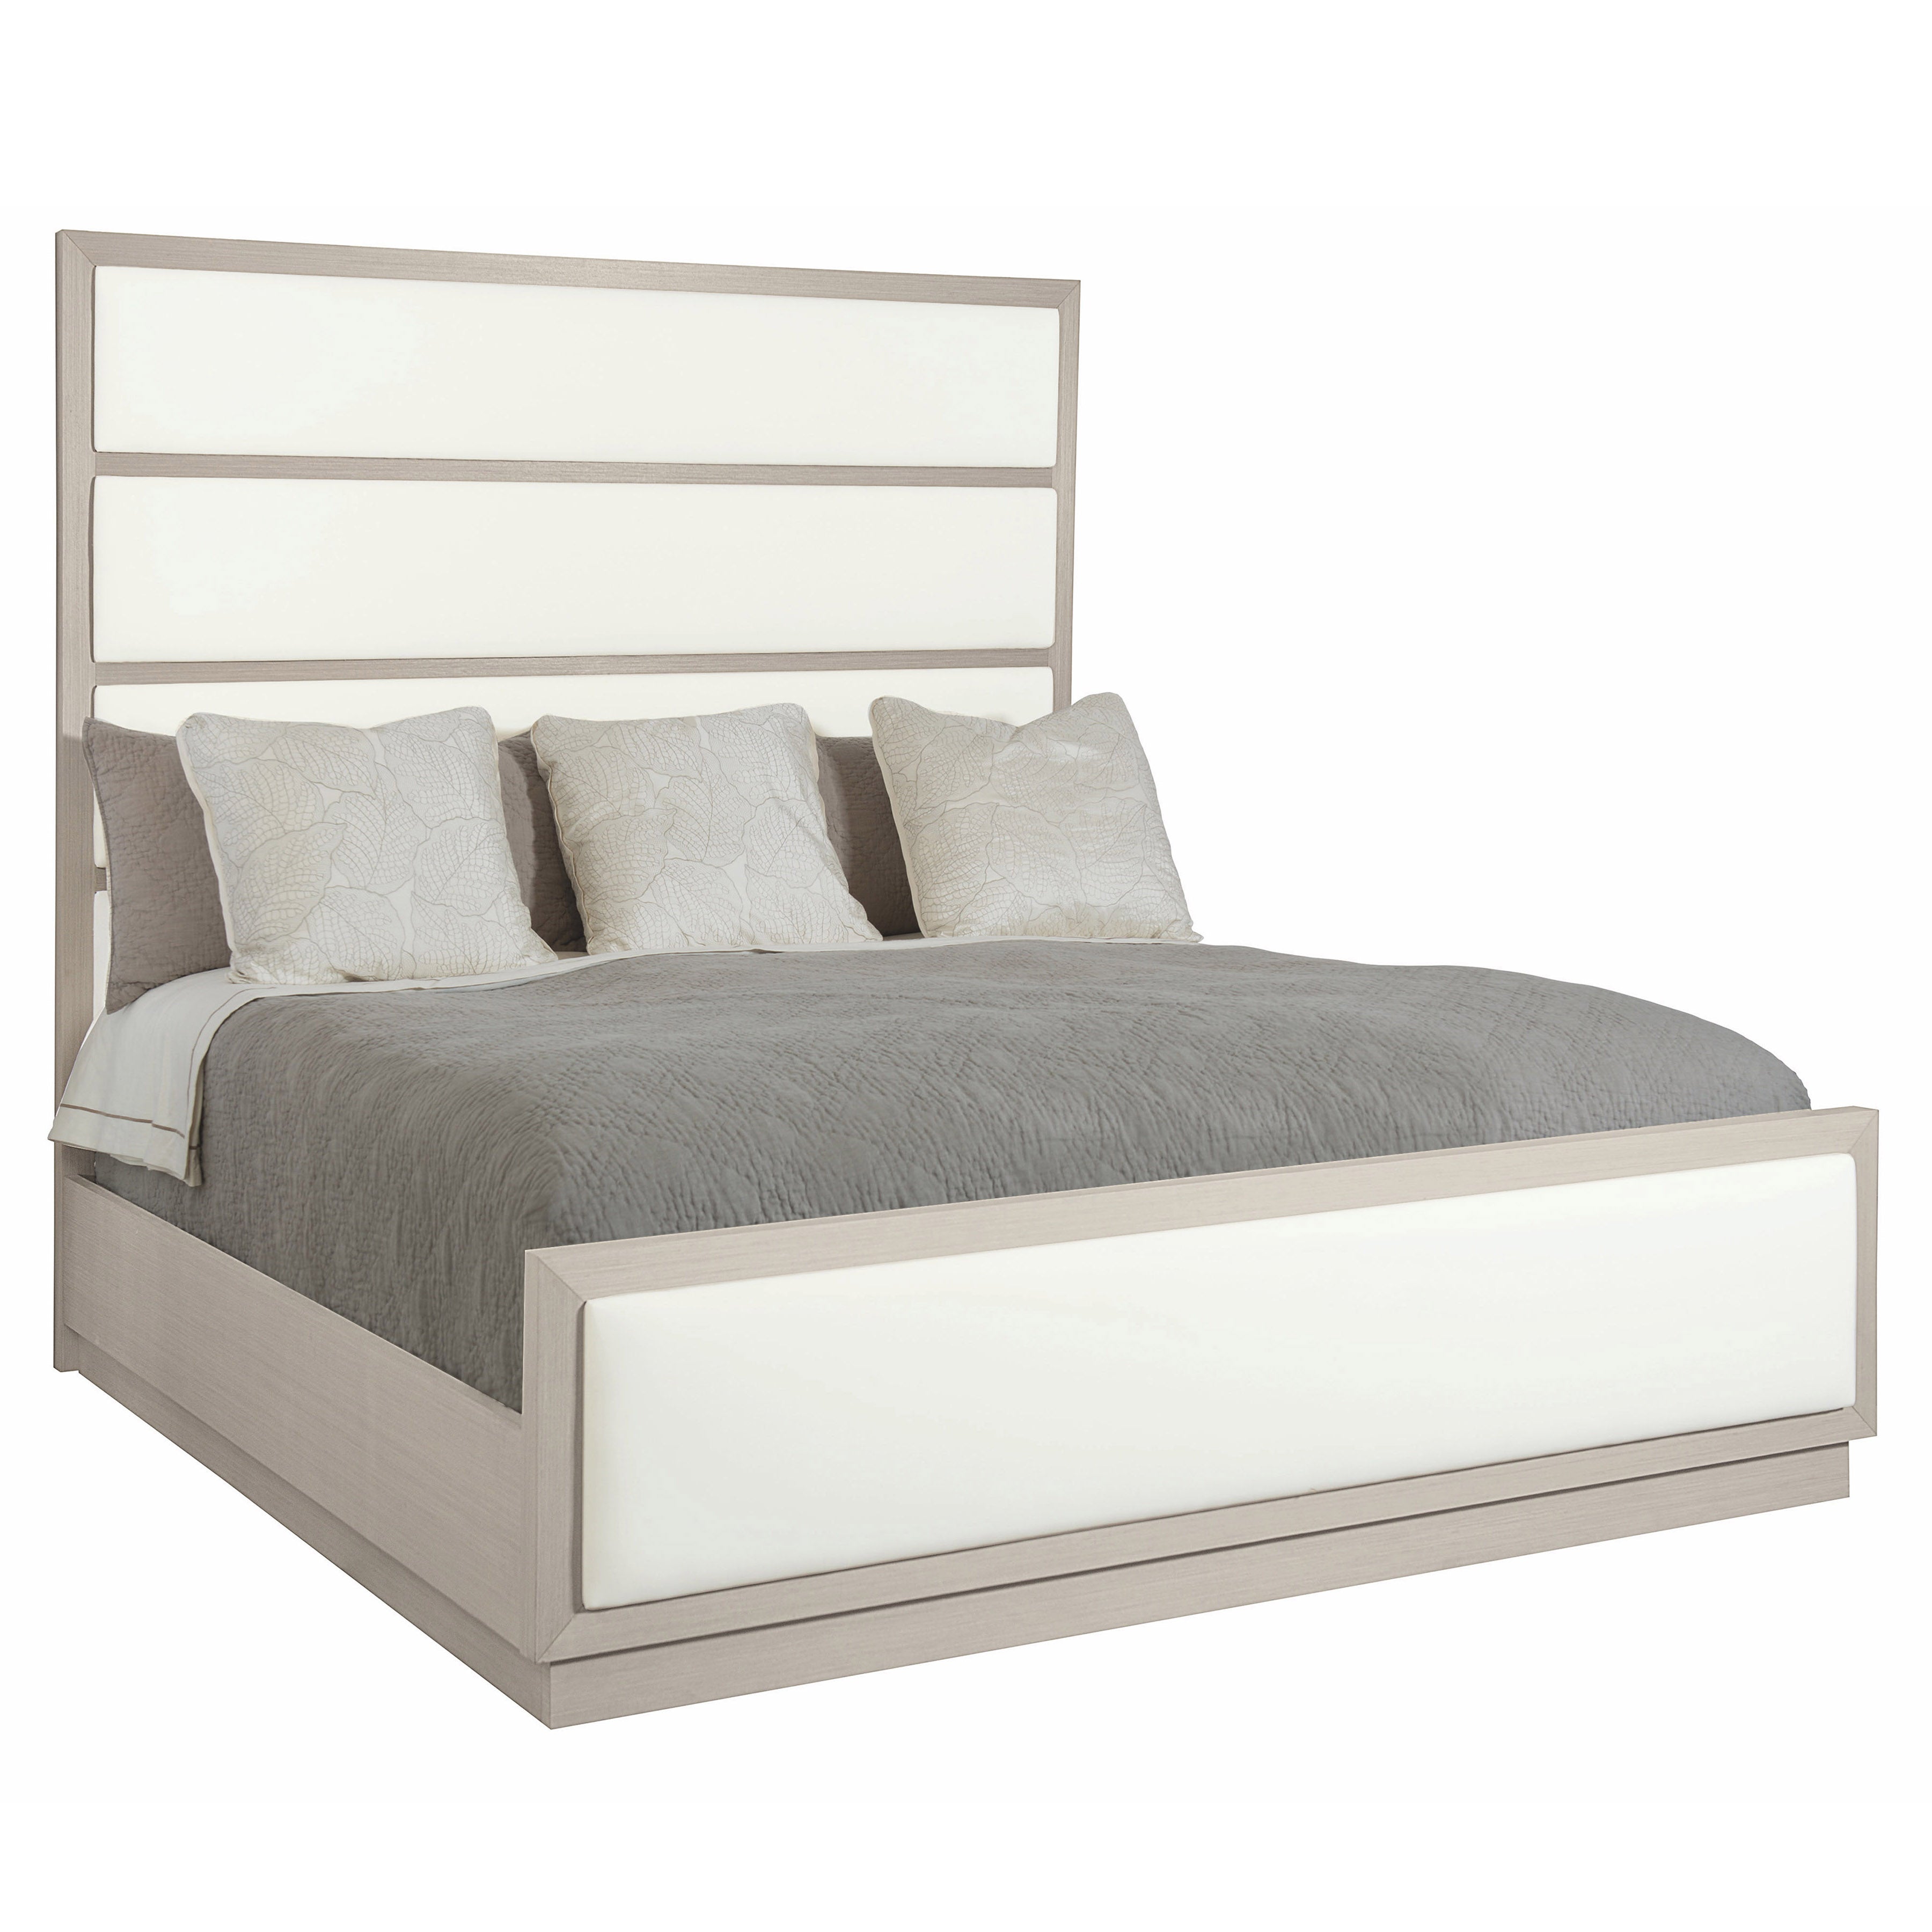 Axiom King Panel Bed with Inset Upholstered Panels